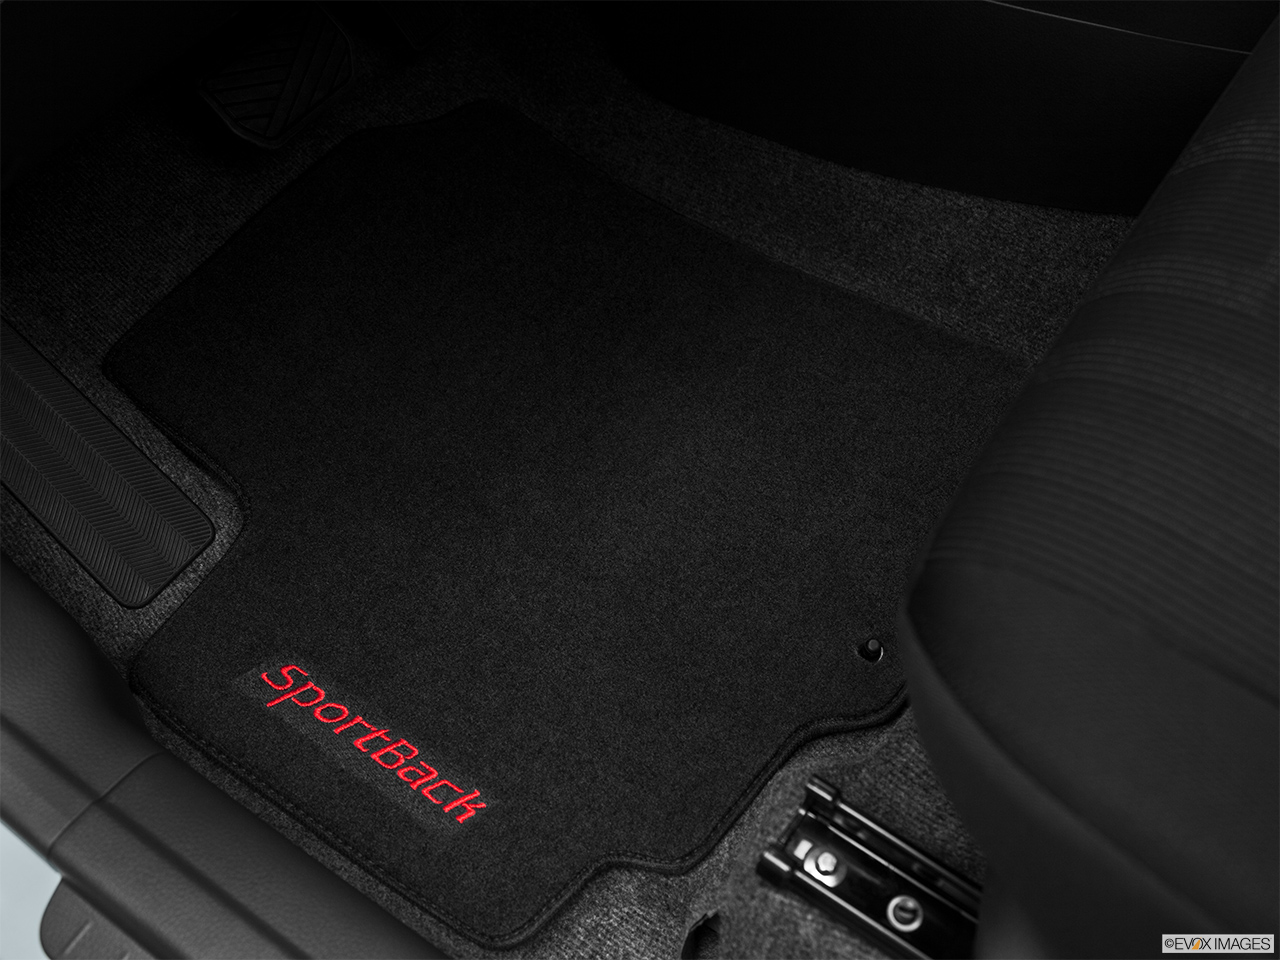 2011 Suzuki SX4 Sportback Technology Driver's floor mat and pedals. Mid-seat level from outside looking in. 